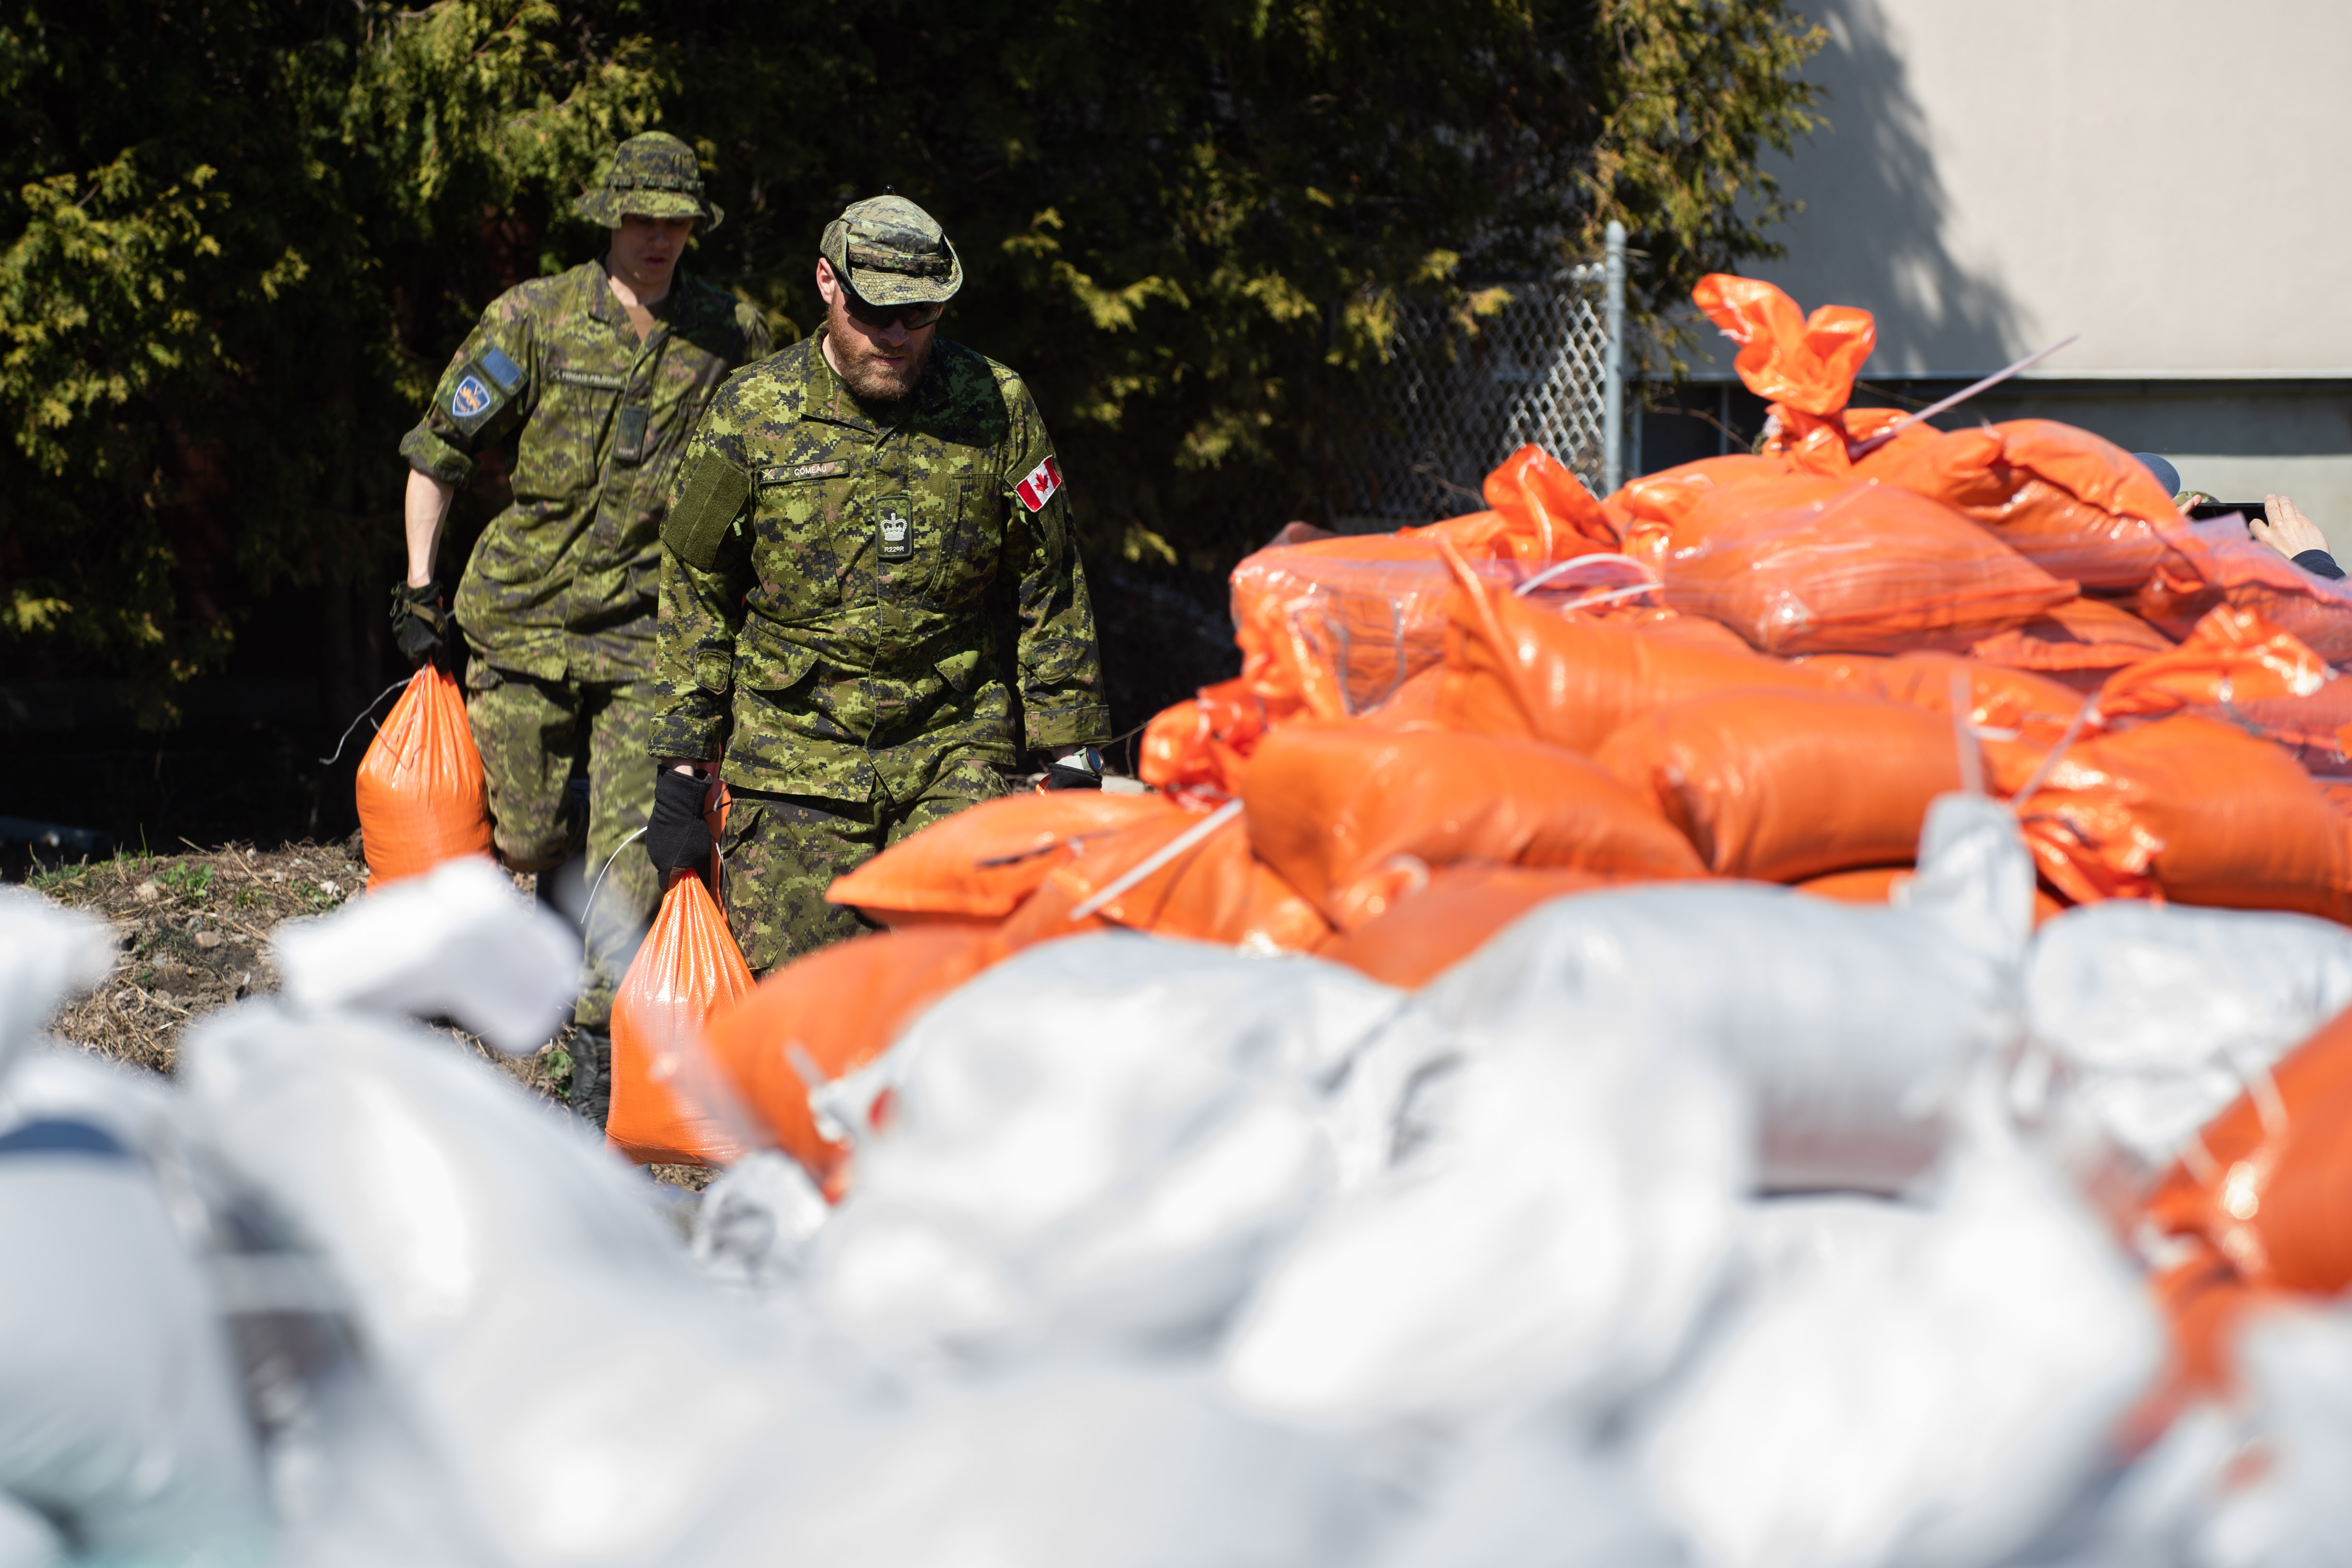 Members from 2e Bataillon, Royal 22e Régiment provide assistance to the flooded areas of Gatineau, Quebec during Operation LENTUS on April 22, 2019. Photo: Pte Hugo Montpetit, Canadian Forces Combat Camera